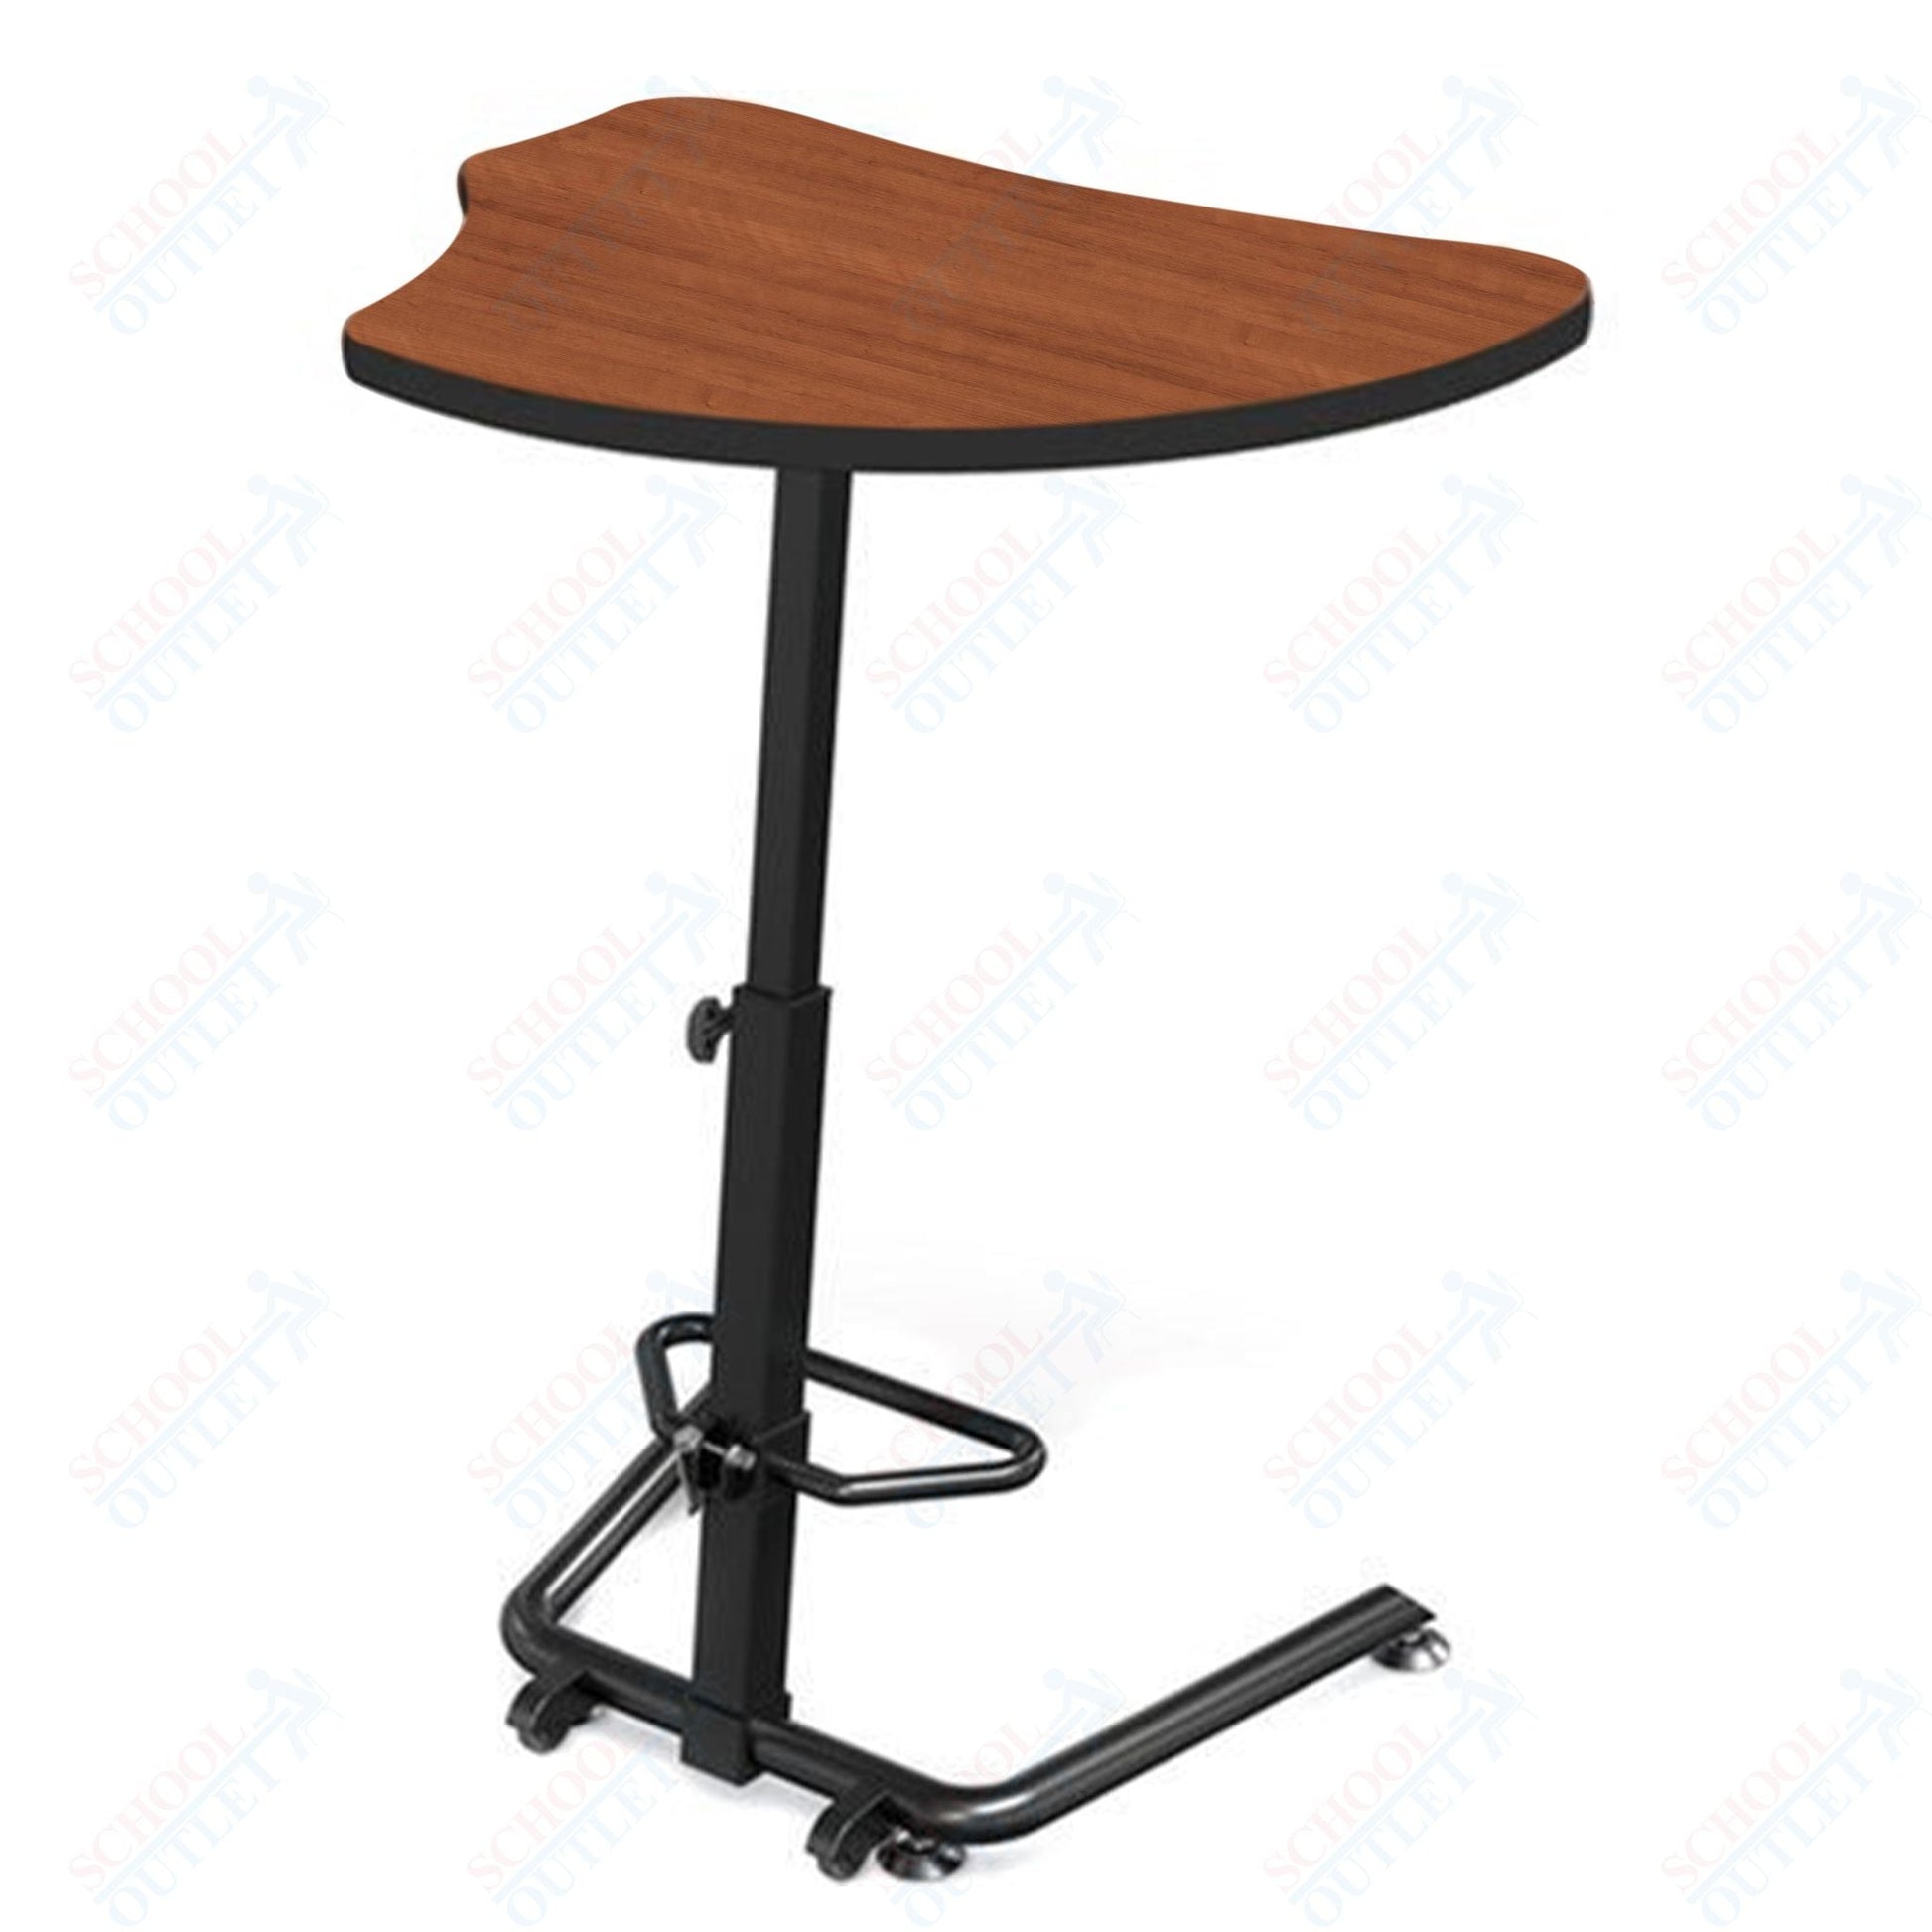 Mooreco Up - Rite Harmony Sit to Stand Configurable Student Desk - Black Edgeband (Mooreco 90532 - G) - SchoolOutlet